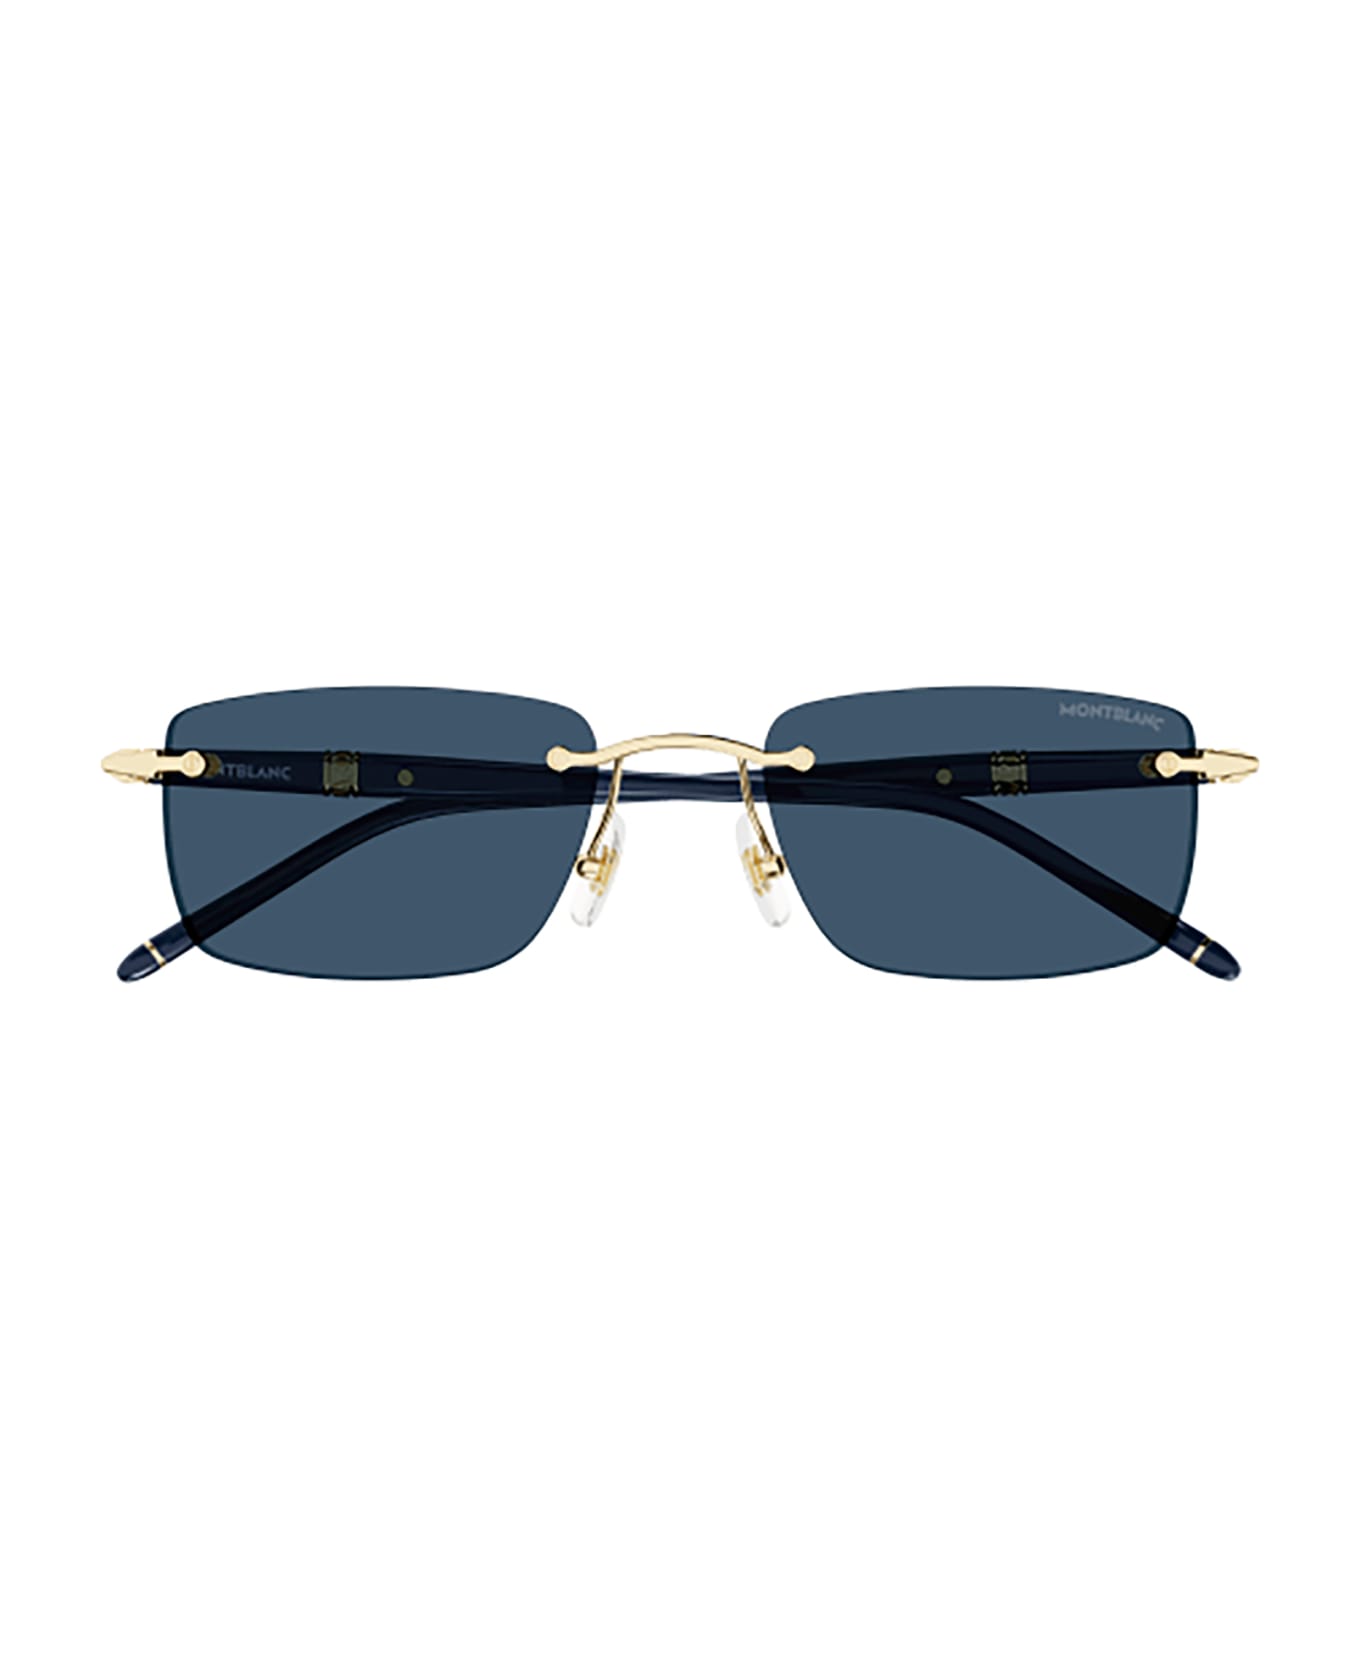 Montblanc MB0344S Sunglasses - the Model 2 sunglasses from Swedish label